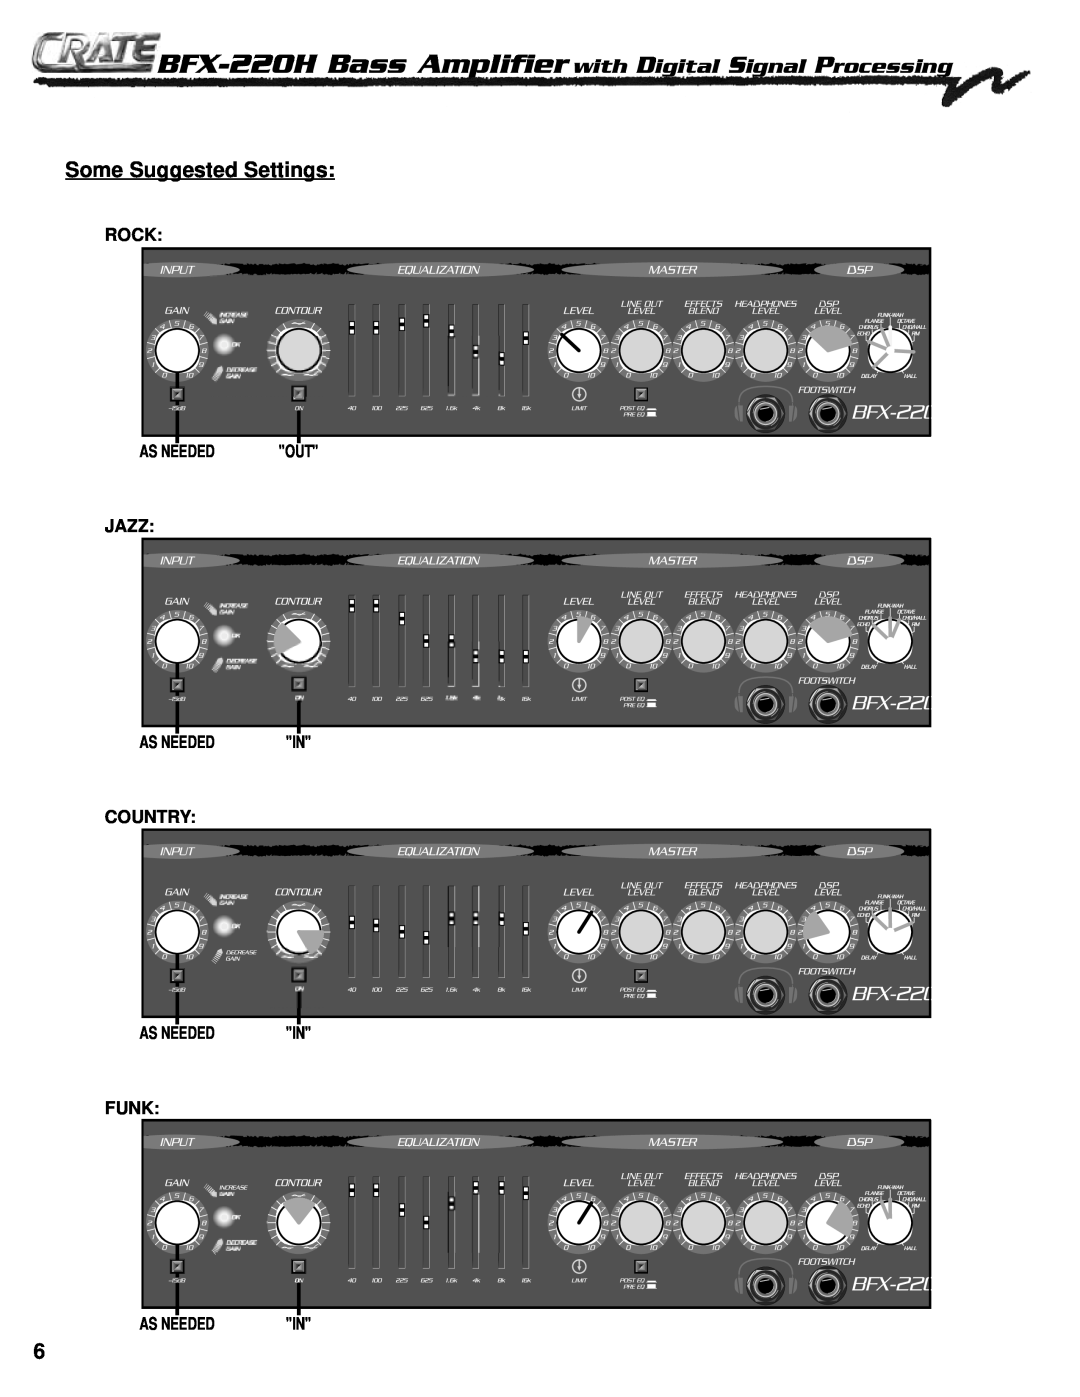 Crate Amplifiers BFX-220H manual Some Suggested Settings, Rock, As Needed, Jazz, Country, Funk 